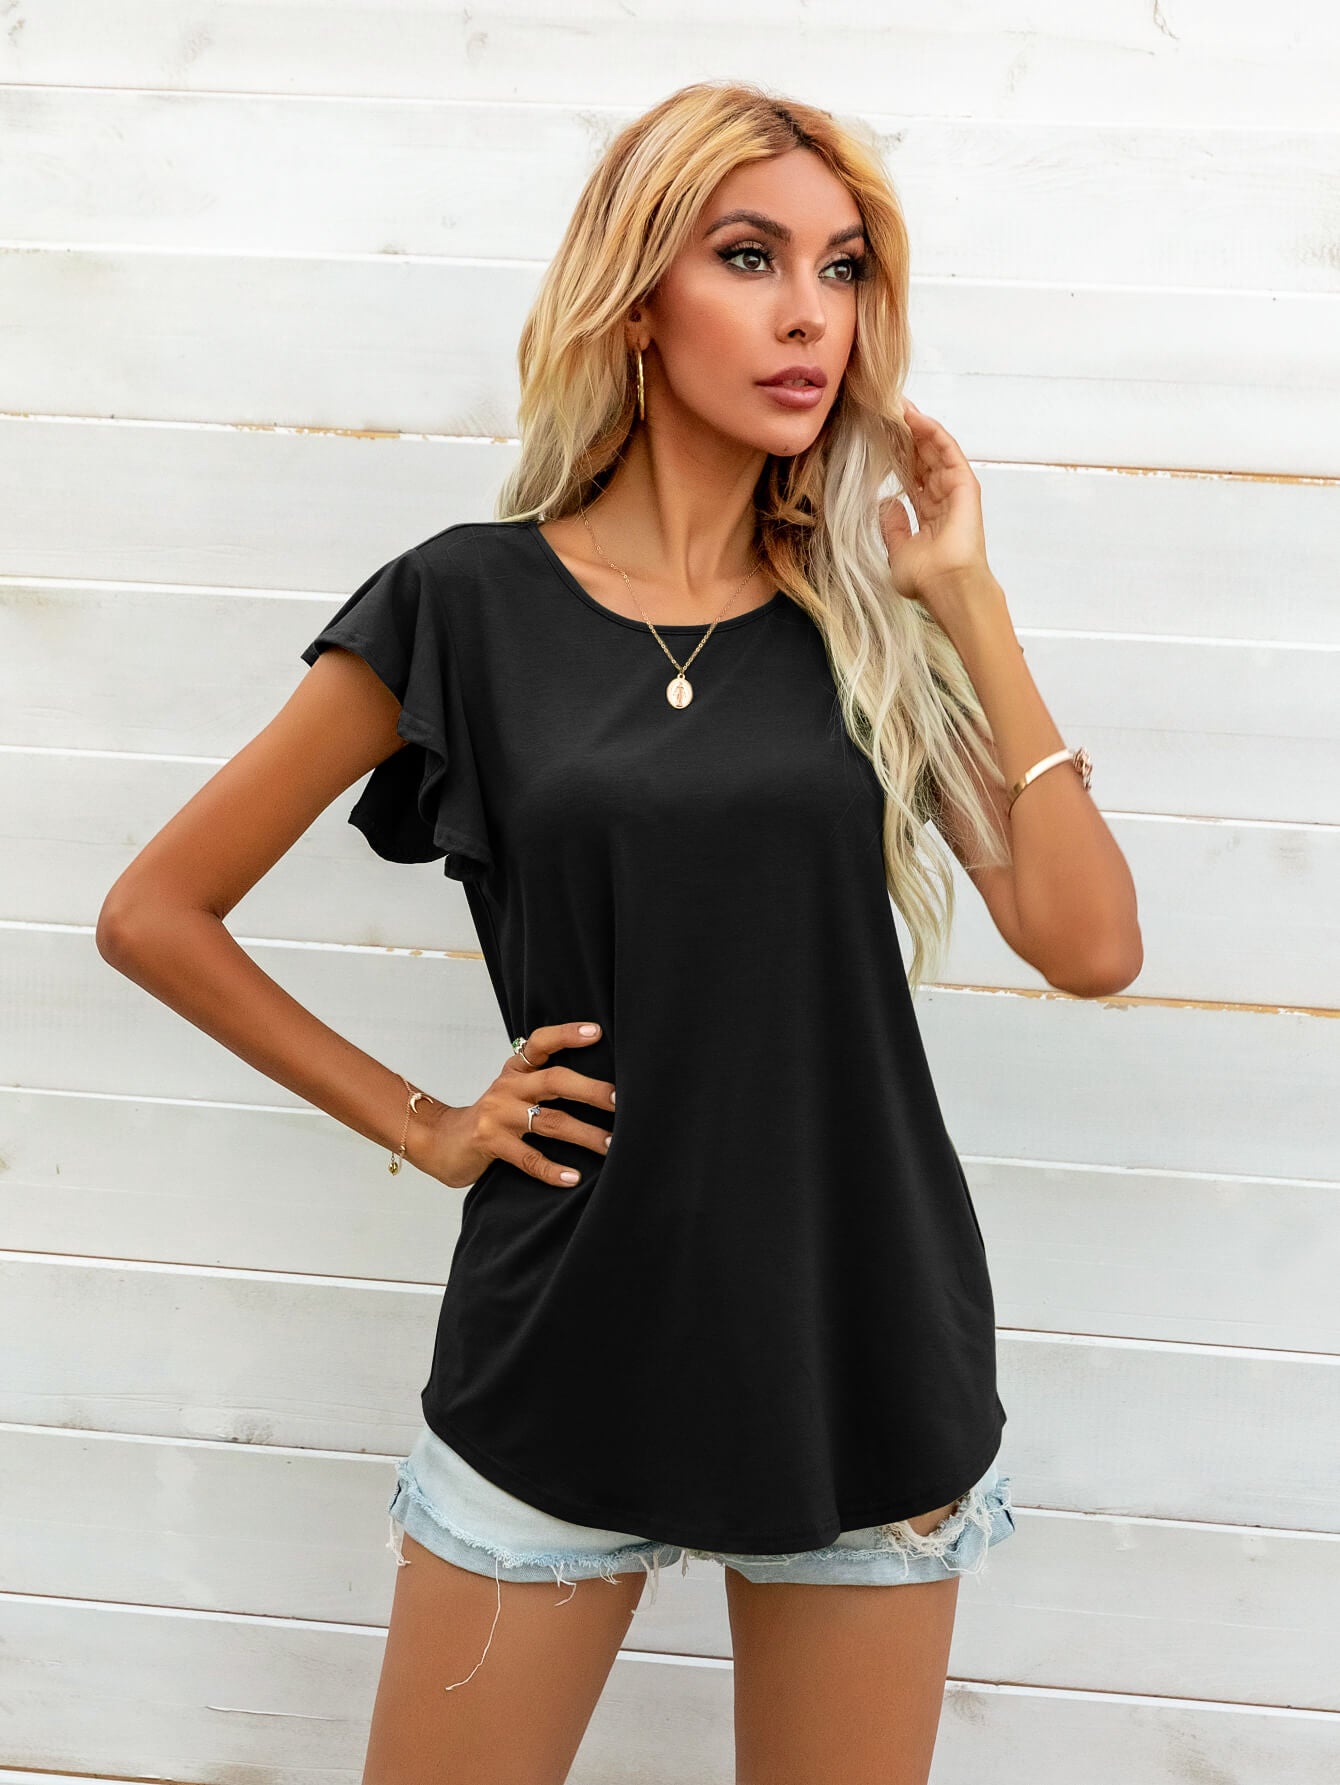 Round Neck Butterfly Sleeve Top - Online Only